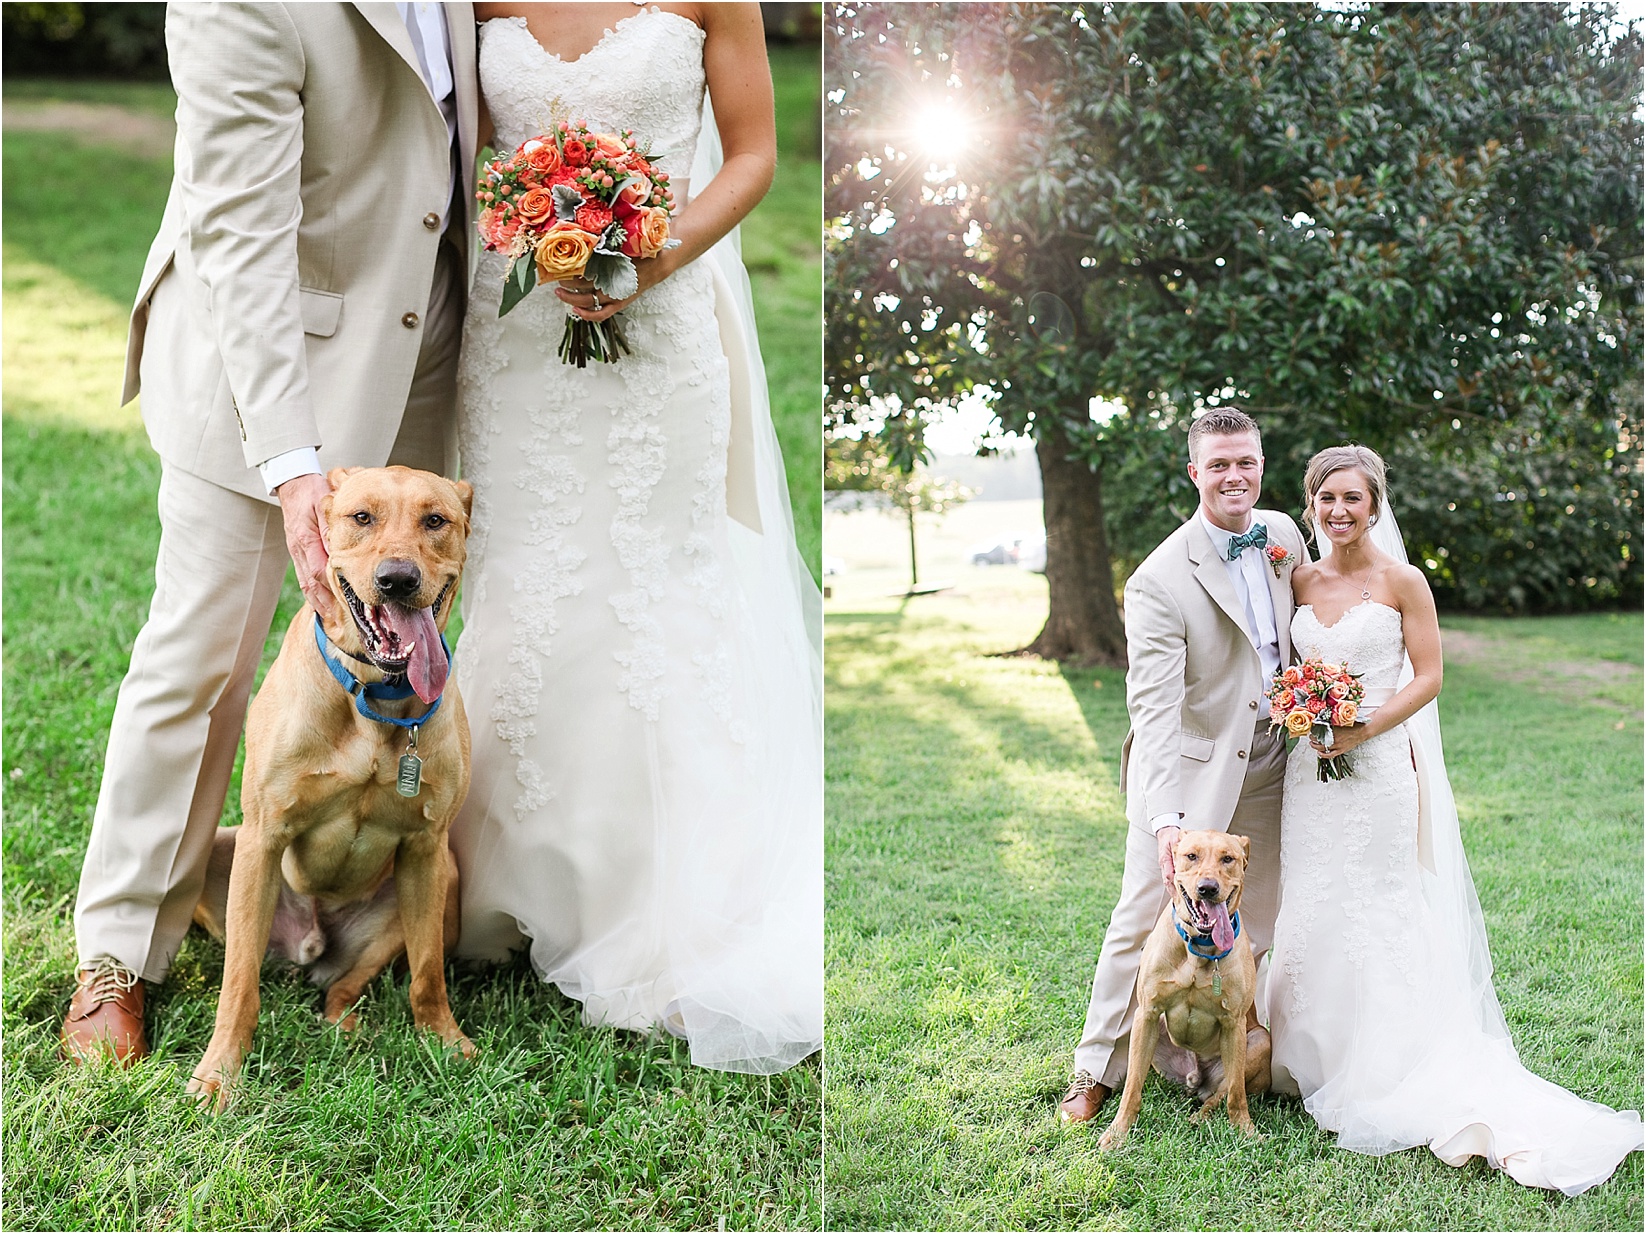 new family brie and groom potraits with dog during their wedding at the Historic Rural Hill wedding ceremony and reception in Huntersville nc